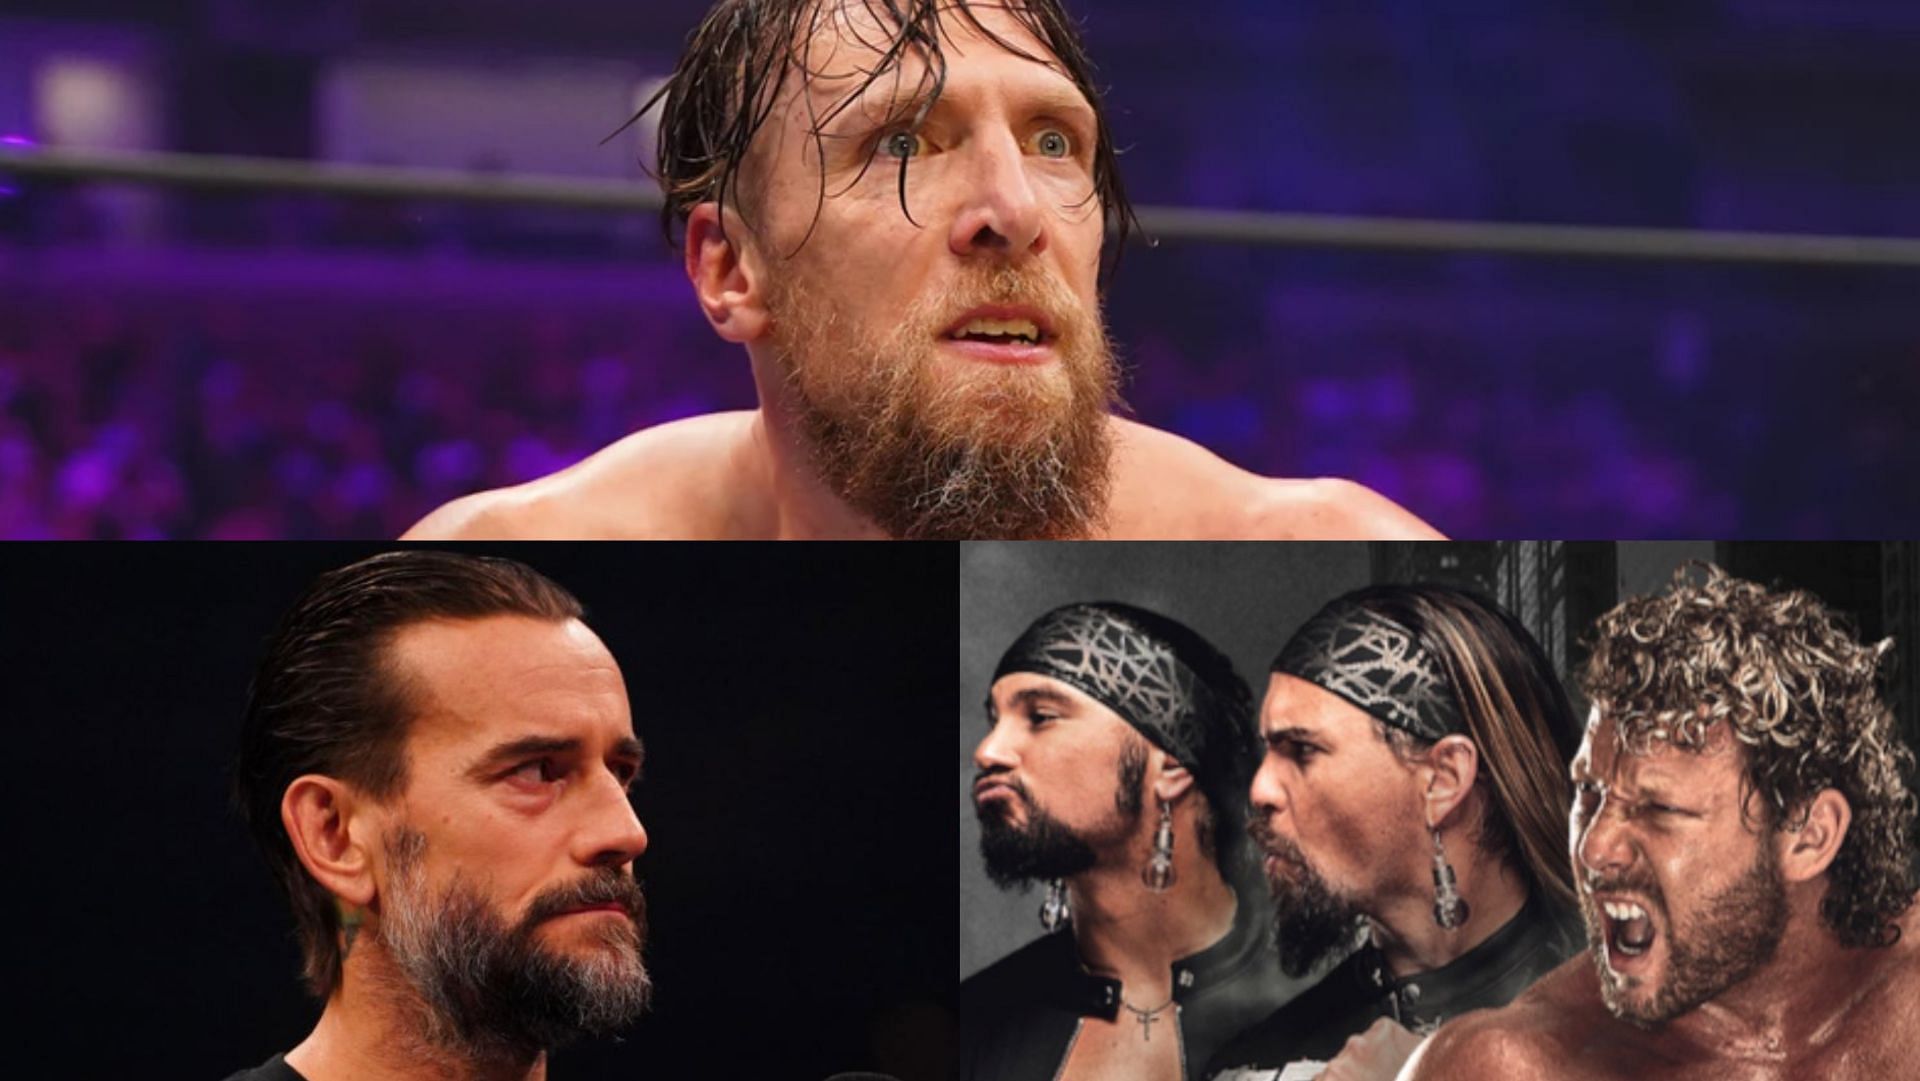 Bryan Danielson has given his thoughts on the All Out brawl that took place